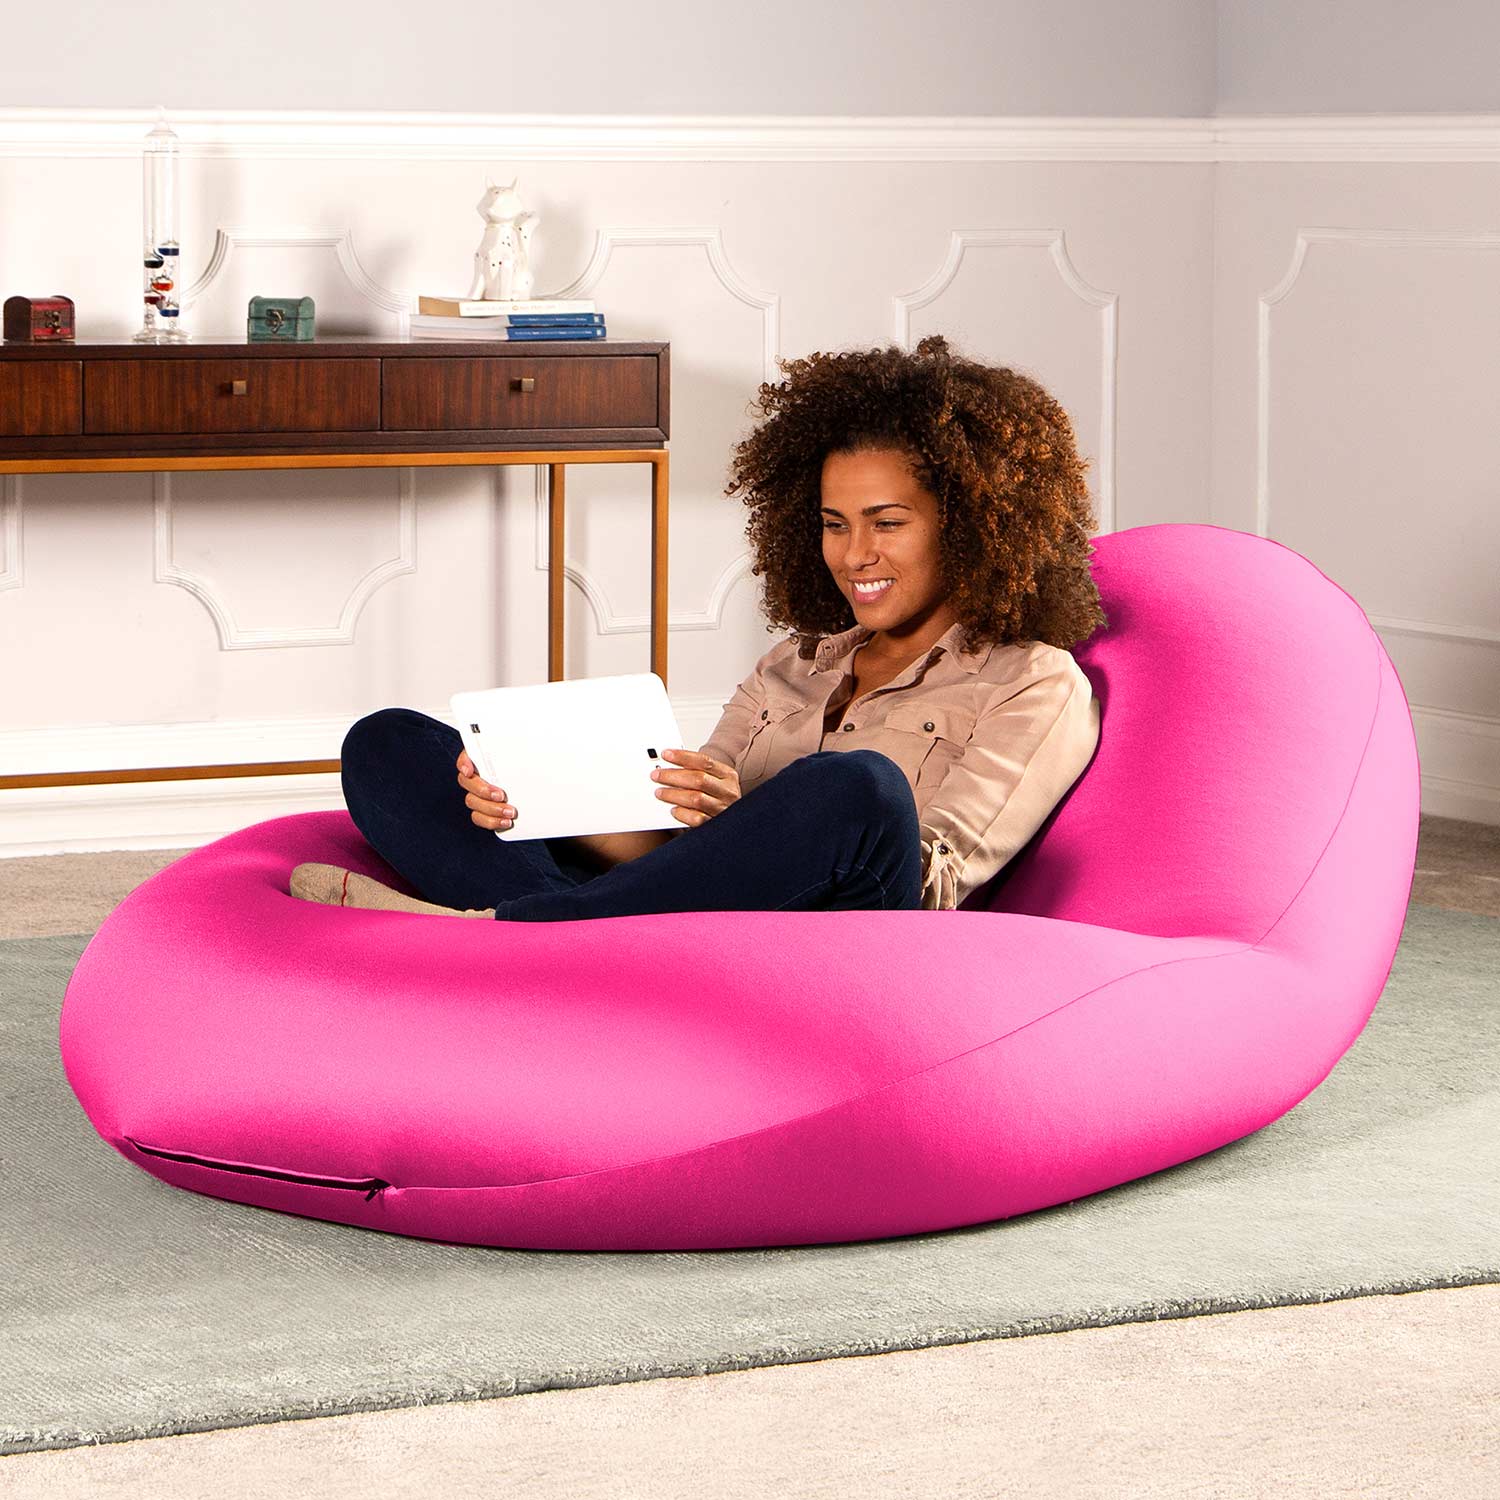 Jaxx Nimbus Large Bean Bag Chair - Hot Pink <!-- Commented out by CMS to  remove site name from title --> <!-- End of Edit by CMS -->